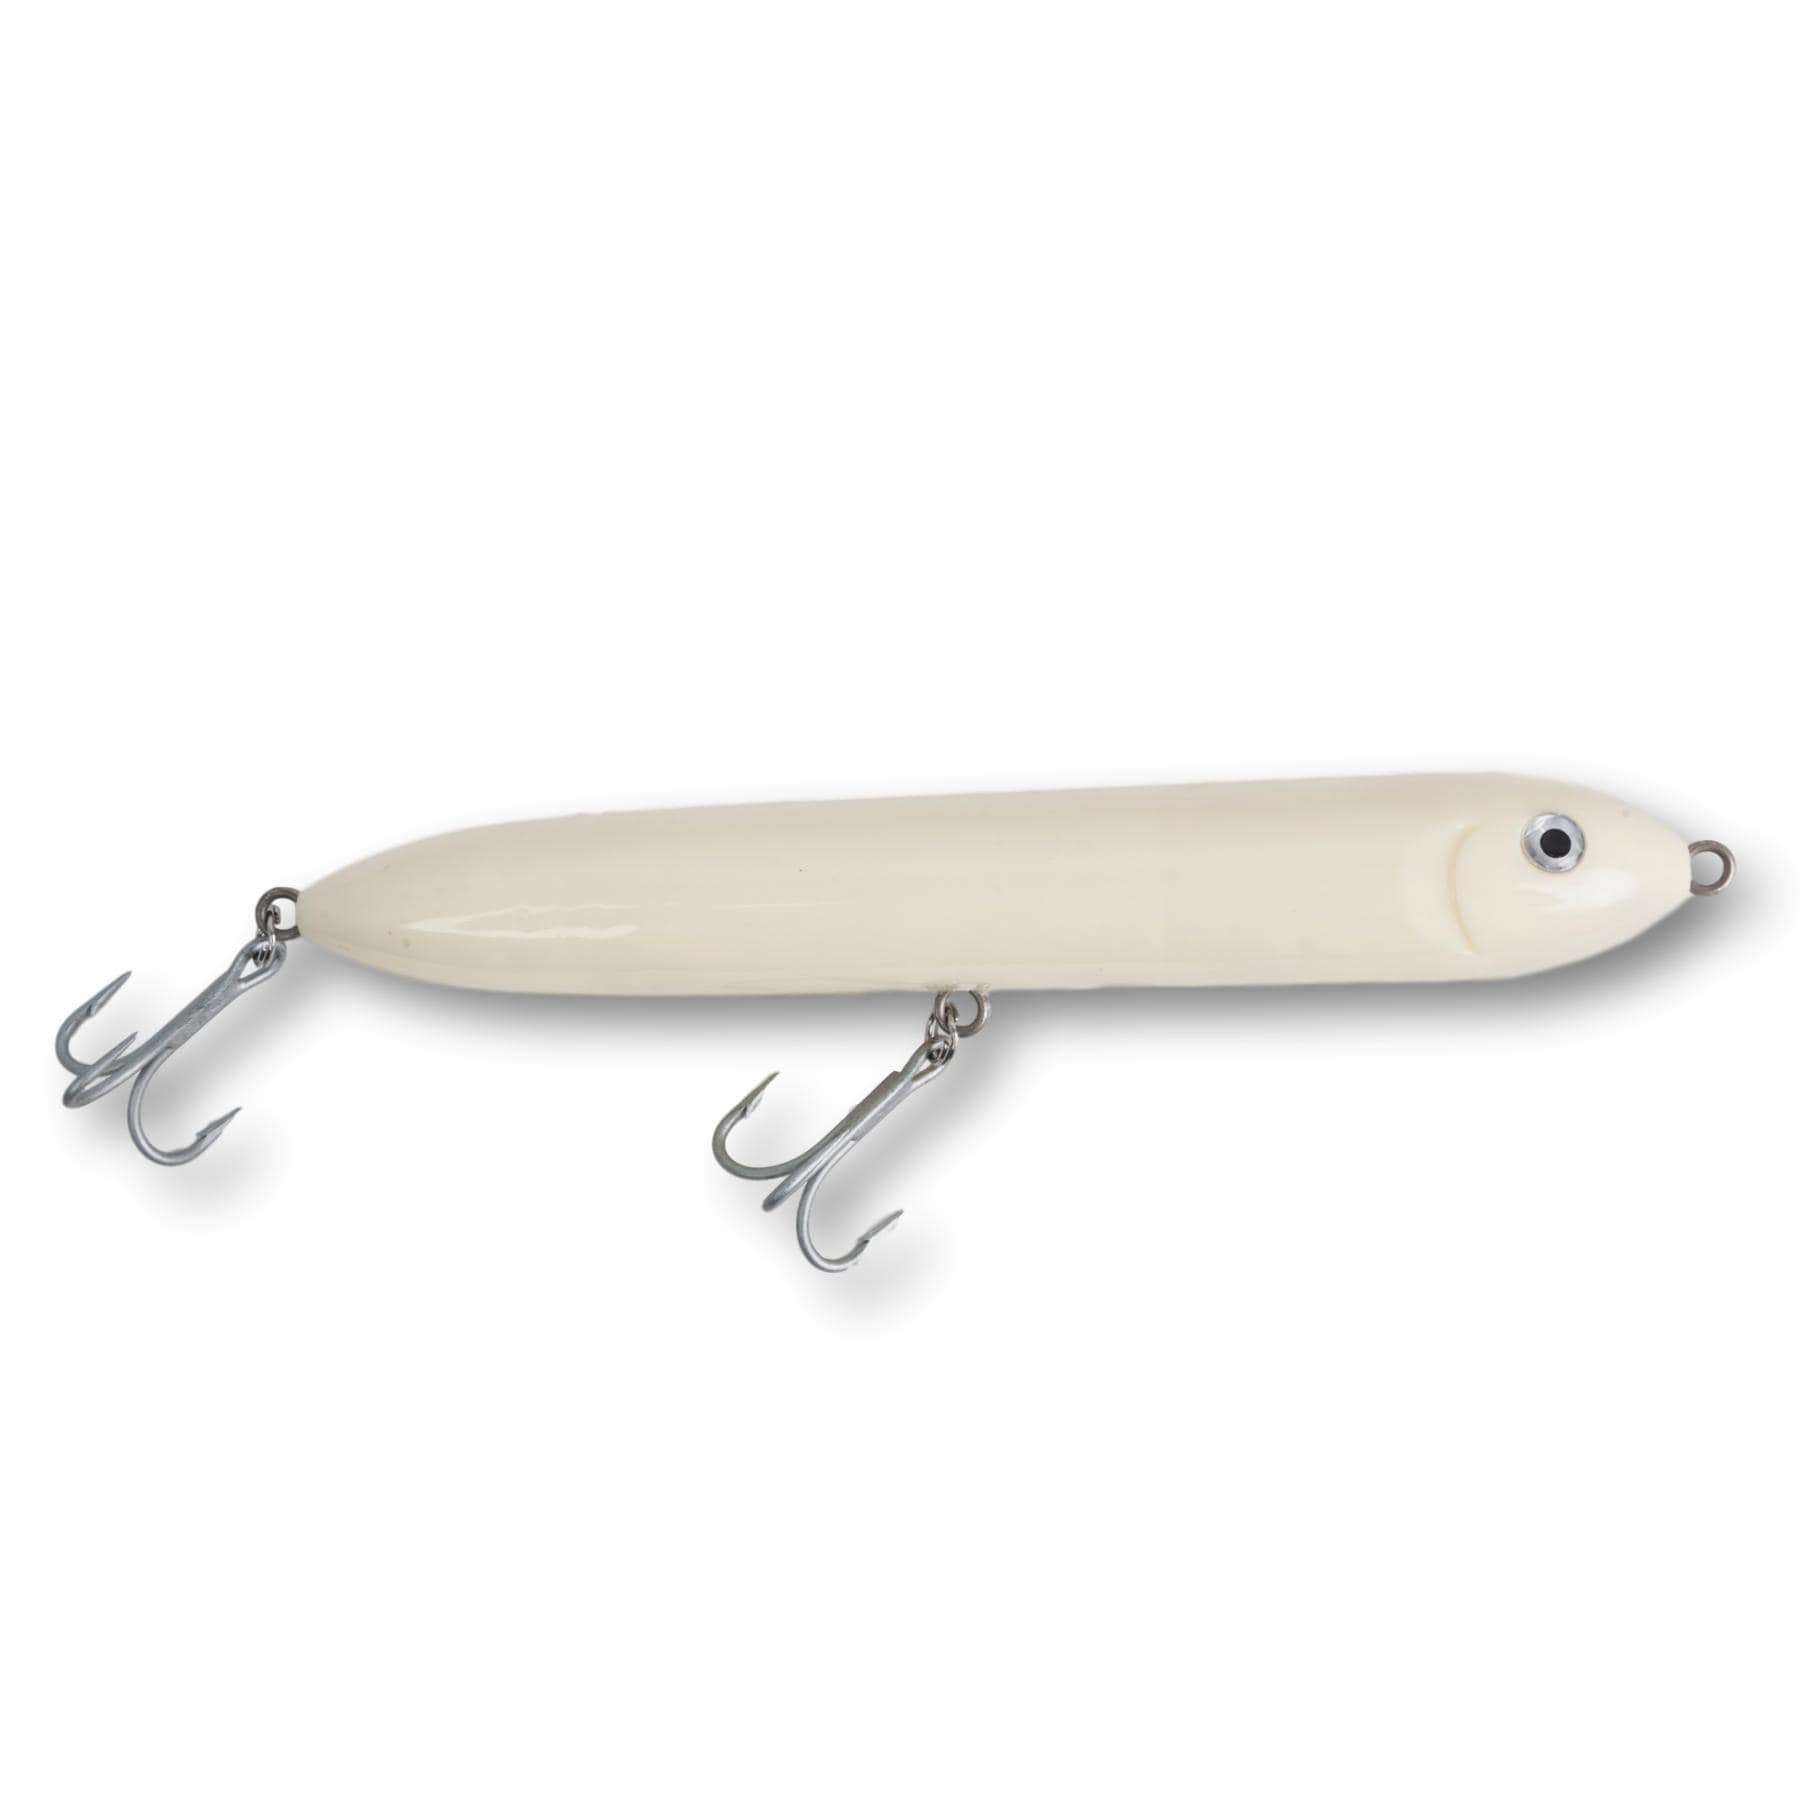 Carlson Offshore Tackle  Saltwater fishing lures, Saltwater lures